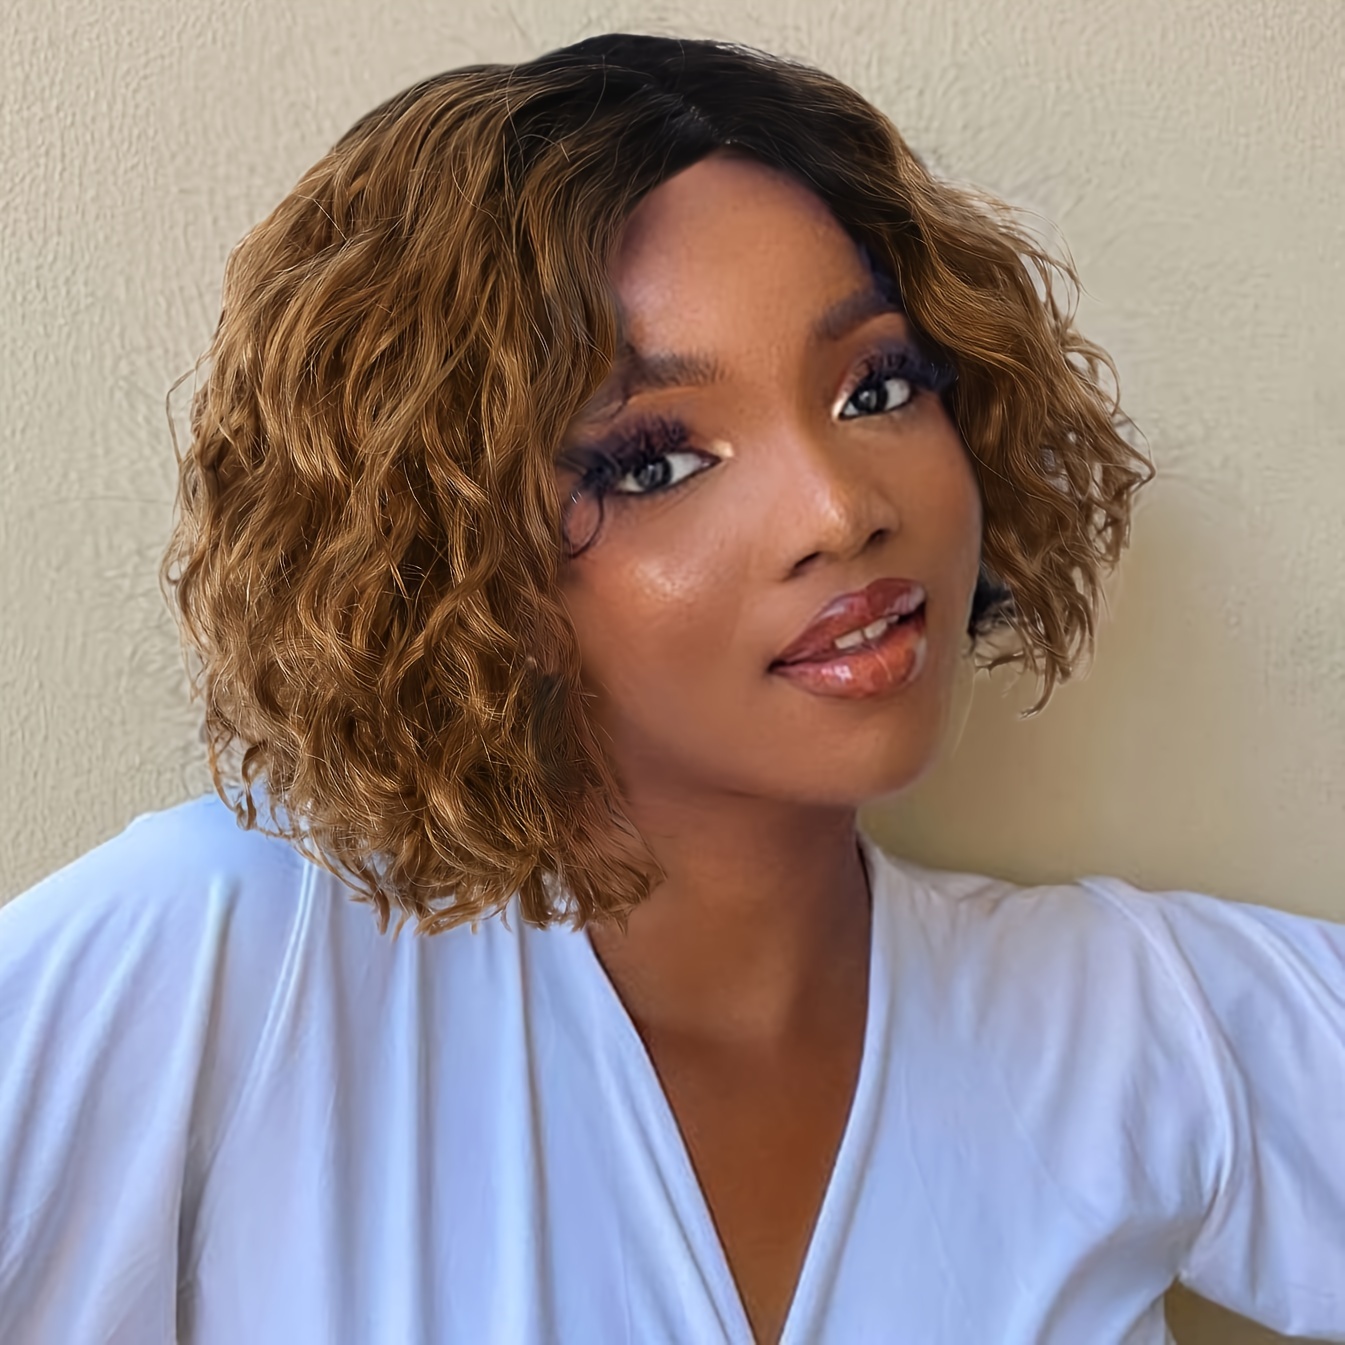 Lace S Short Natural Hair Wigs Curly Wave Side Part Short Bob Pixie Cut  Brazilian Remy Deep None Front For Women 230420 From Bong06, $17.93